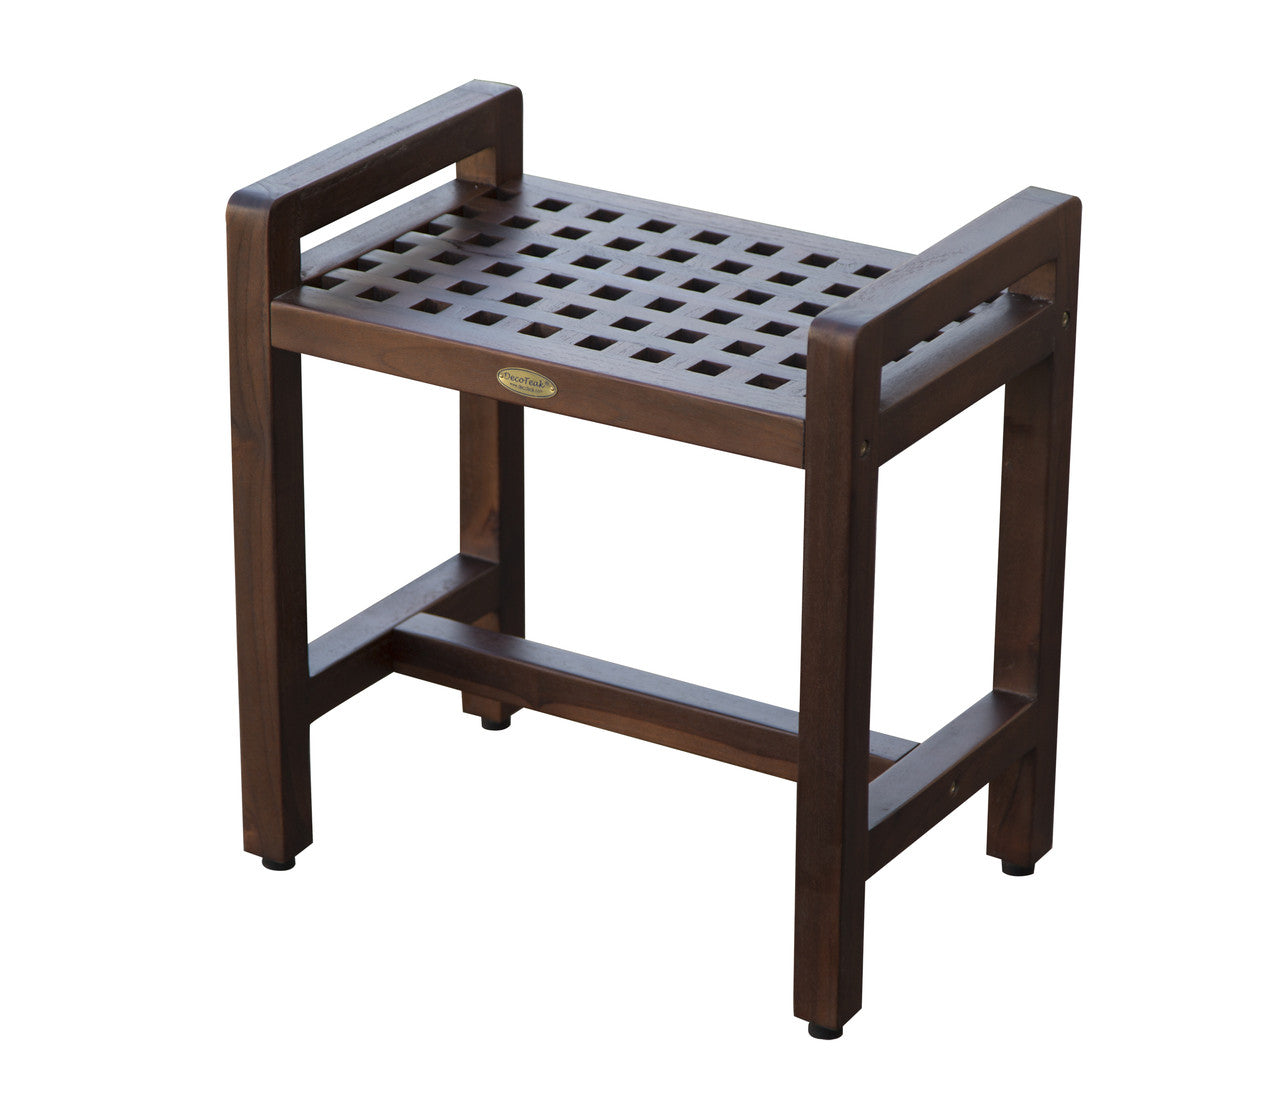 DecoTeak Espalier 20" Teak Wood Shower Bench with LiftAide Arms in Woodland Brown Finish